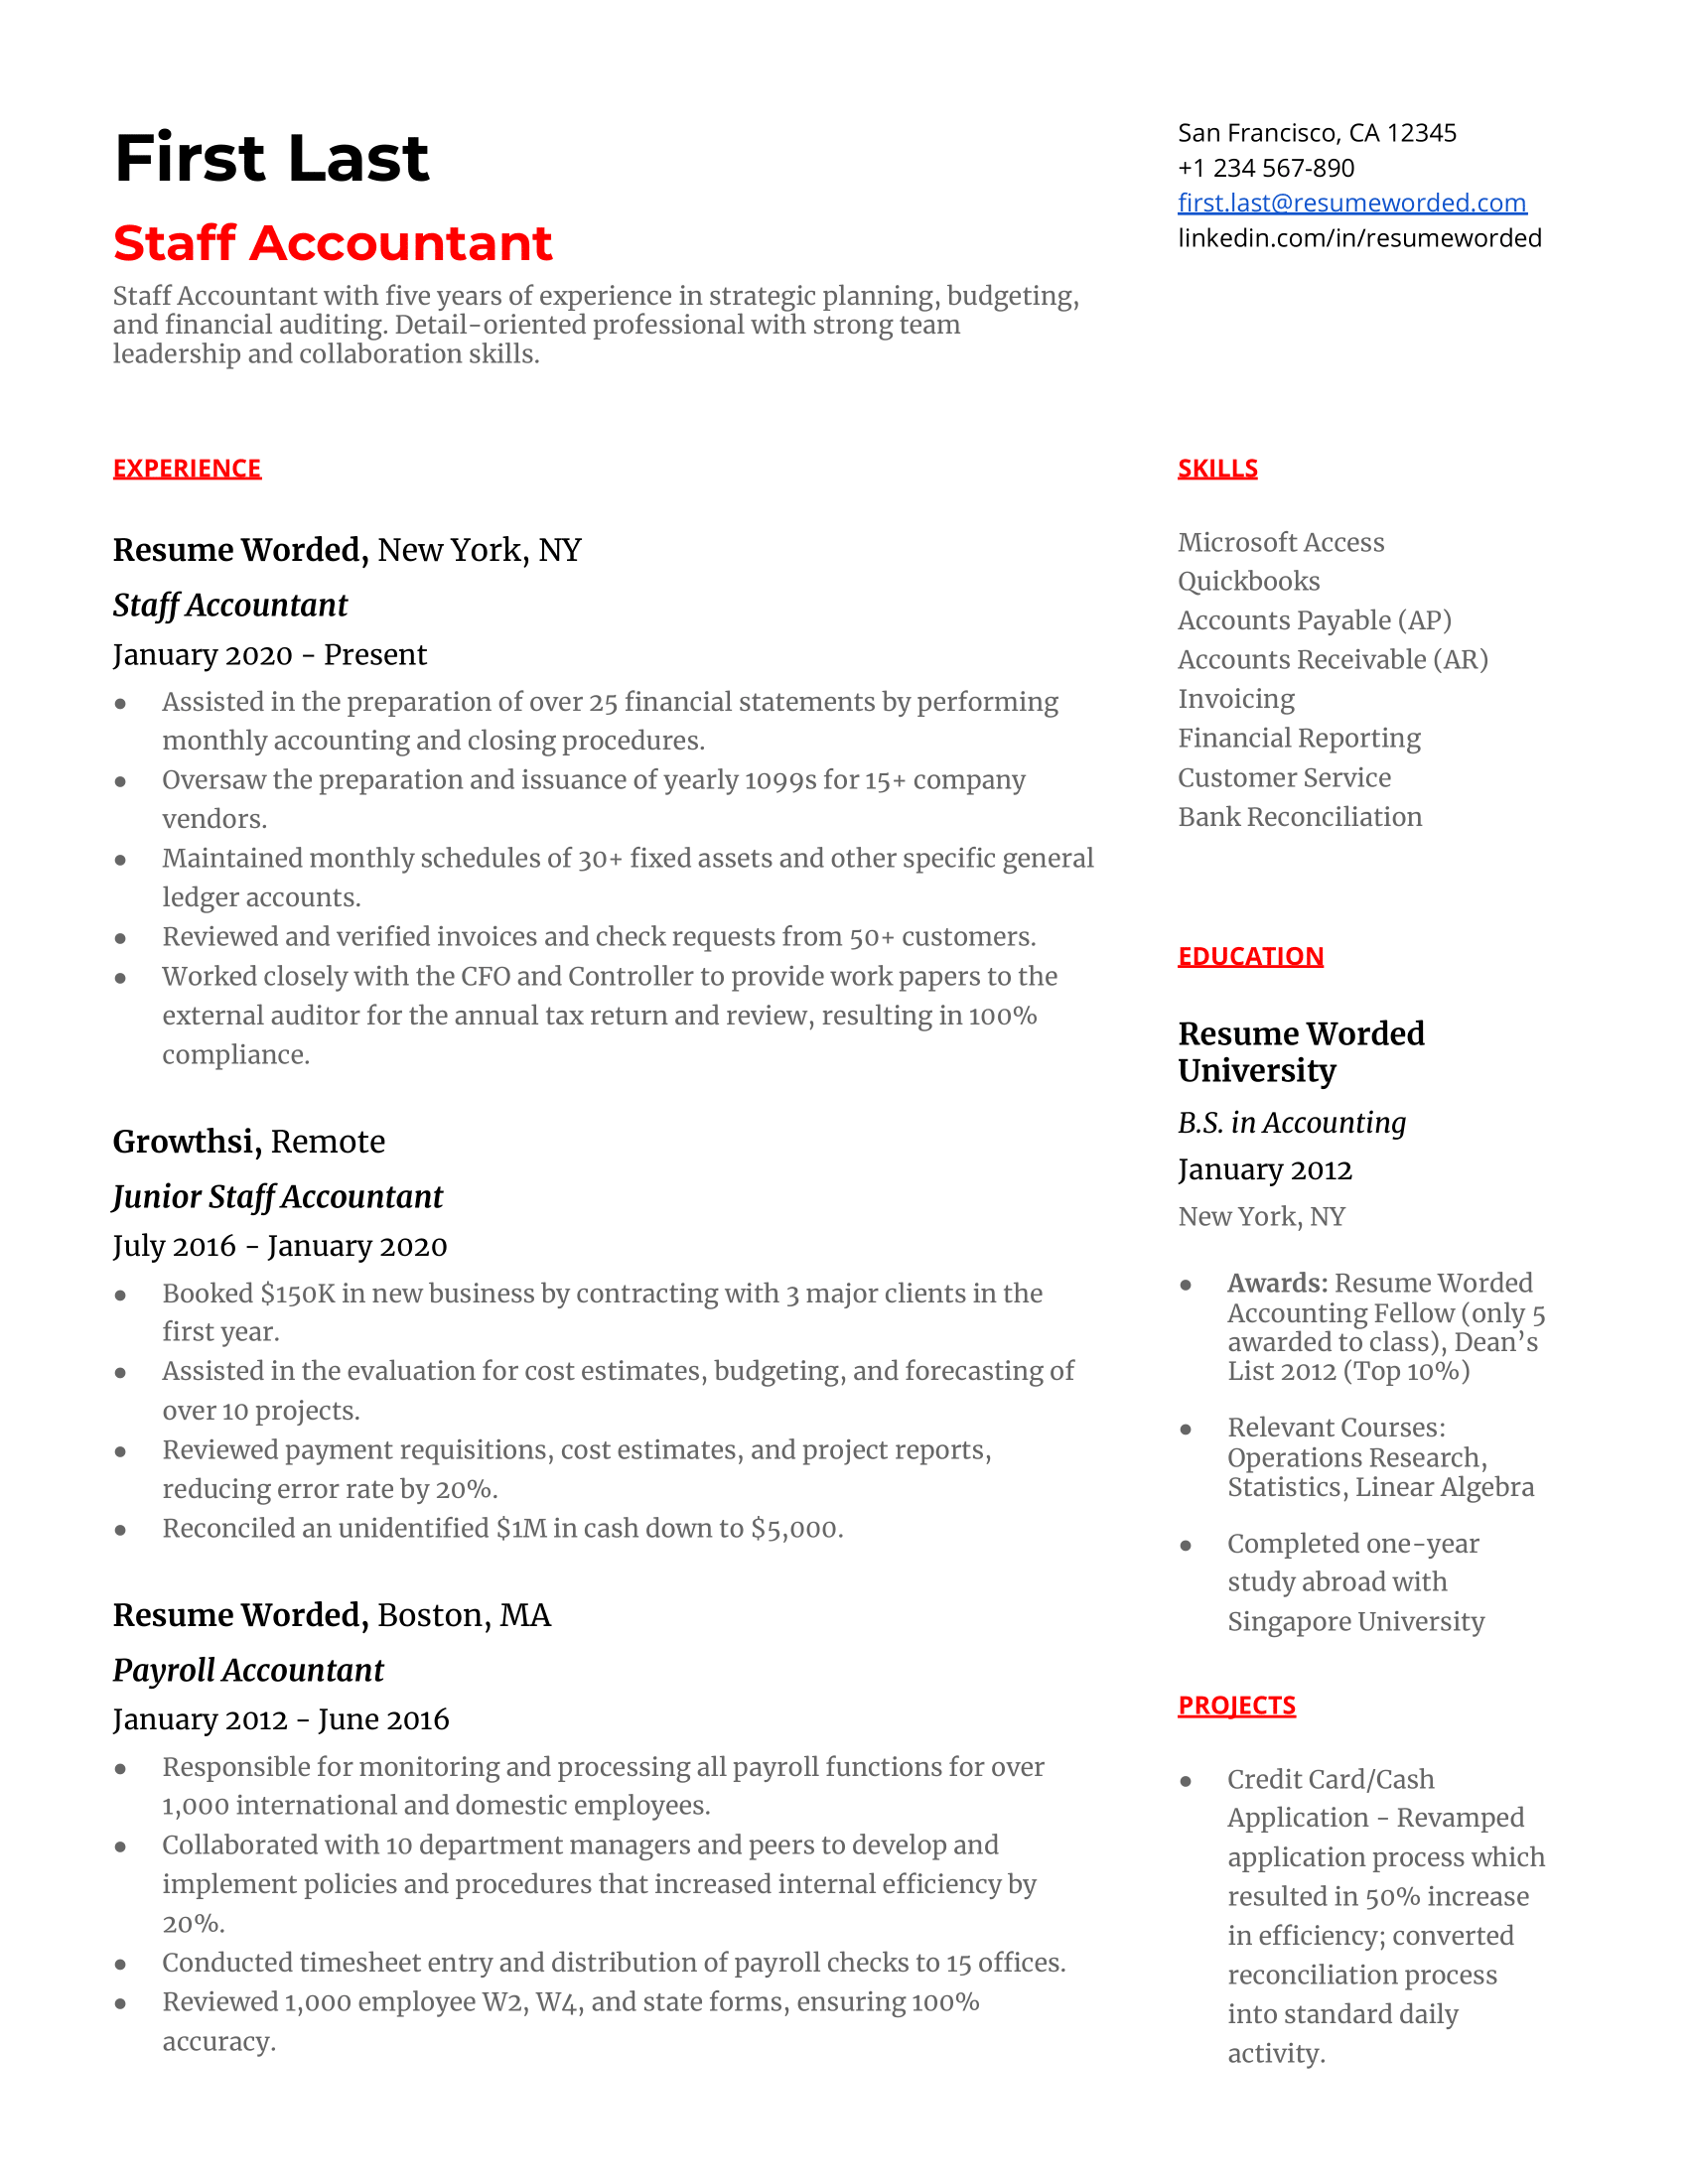 A well-structured Staff Accountant CV showcasing software proficiency and experience in financial reporting and audits.